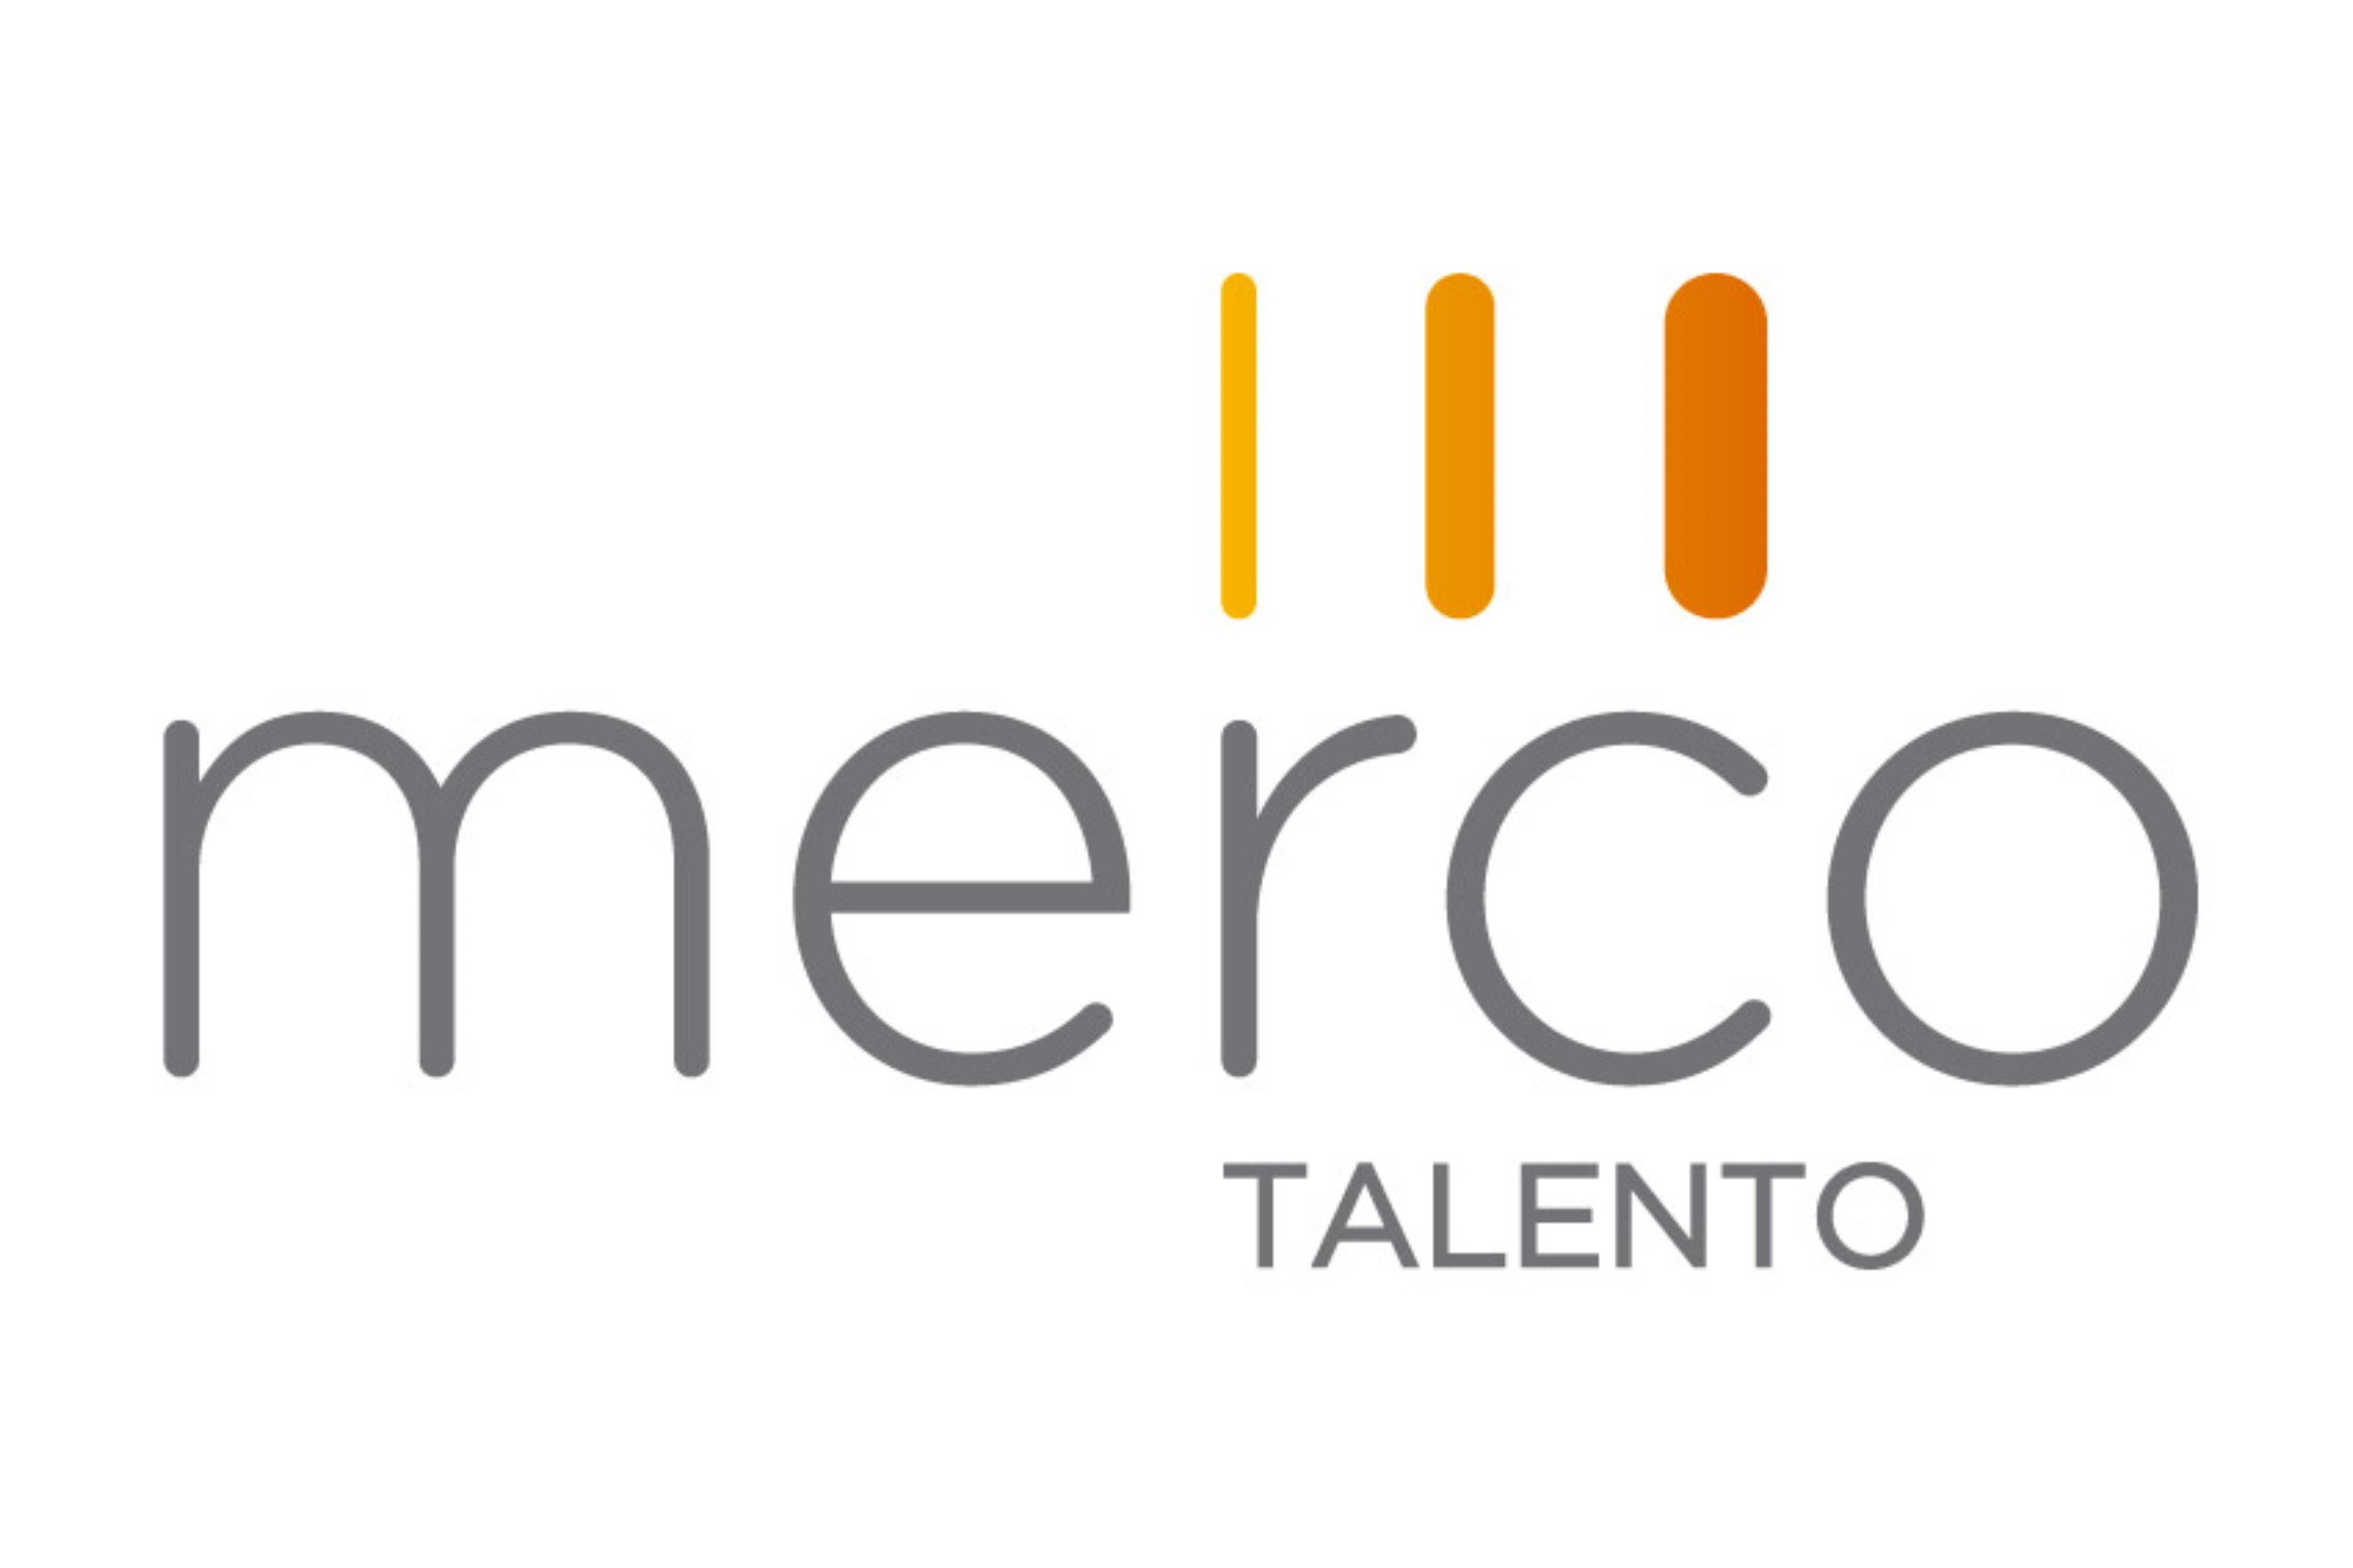 Icono MERCO Talento included SURA among the top 10 companies to work for in Colombia